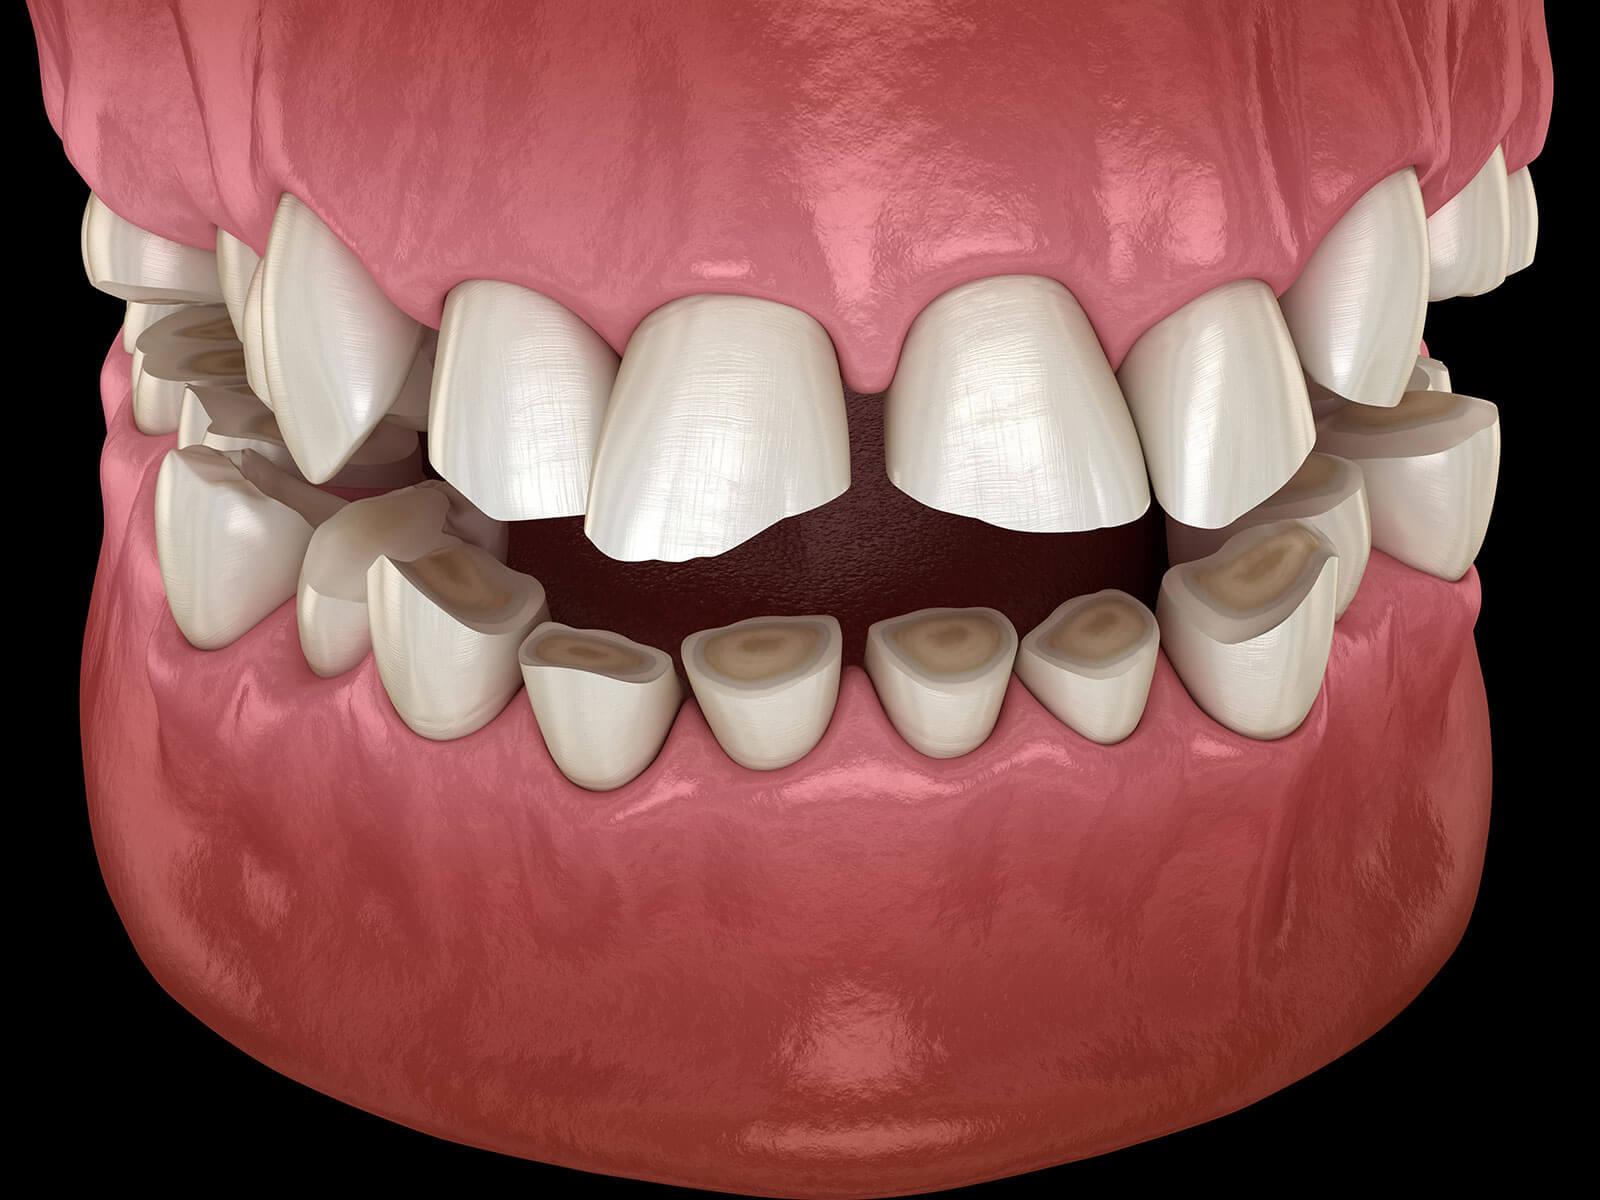 What Can I Do To Prevent Dental Erosion?